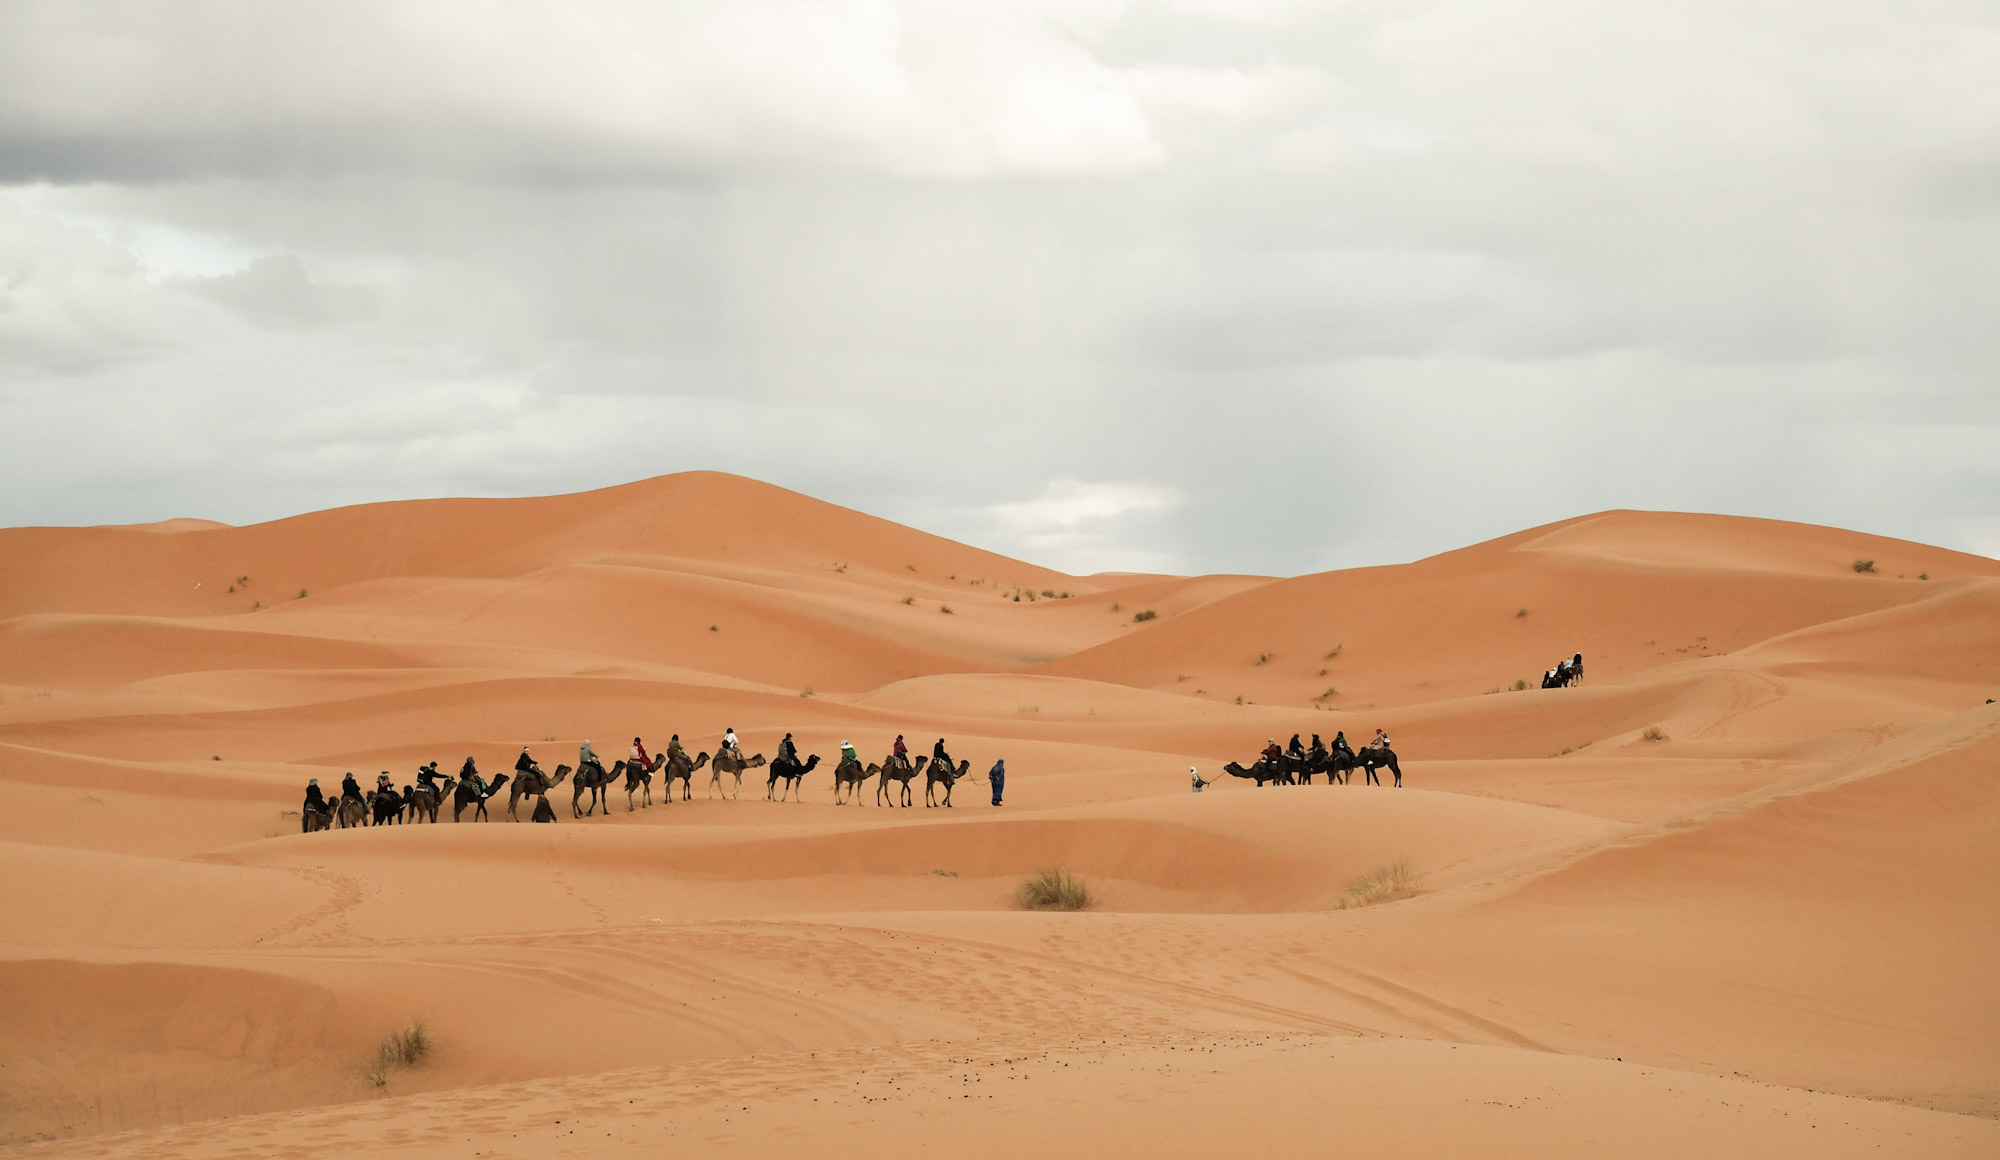 Groups of tourist camel trips departing into the desert at Merzouga, Morocco